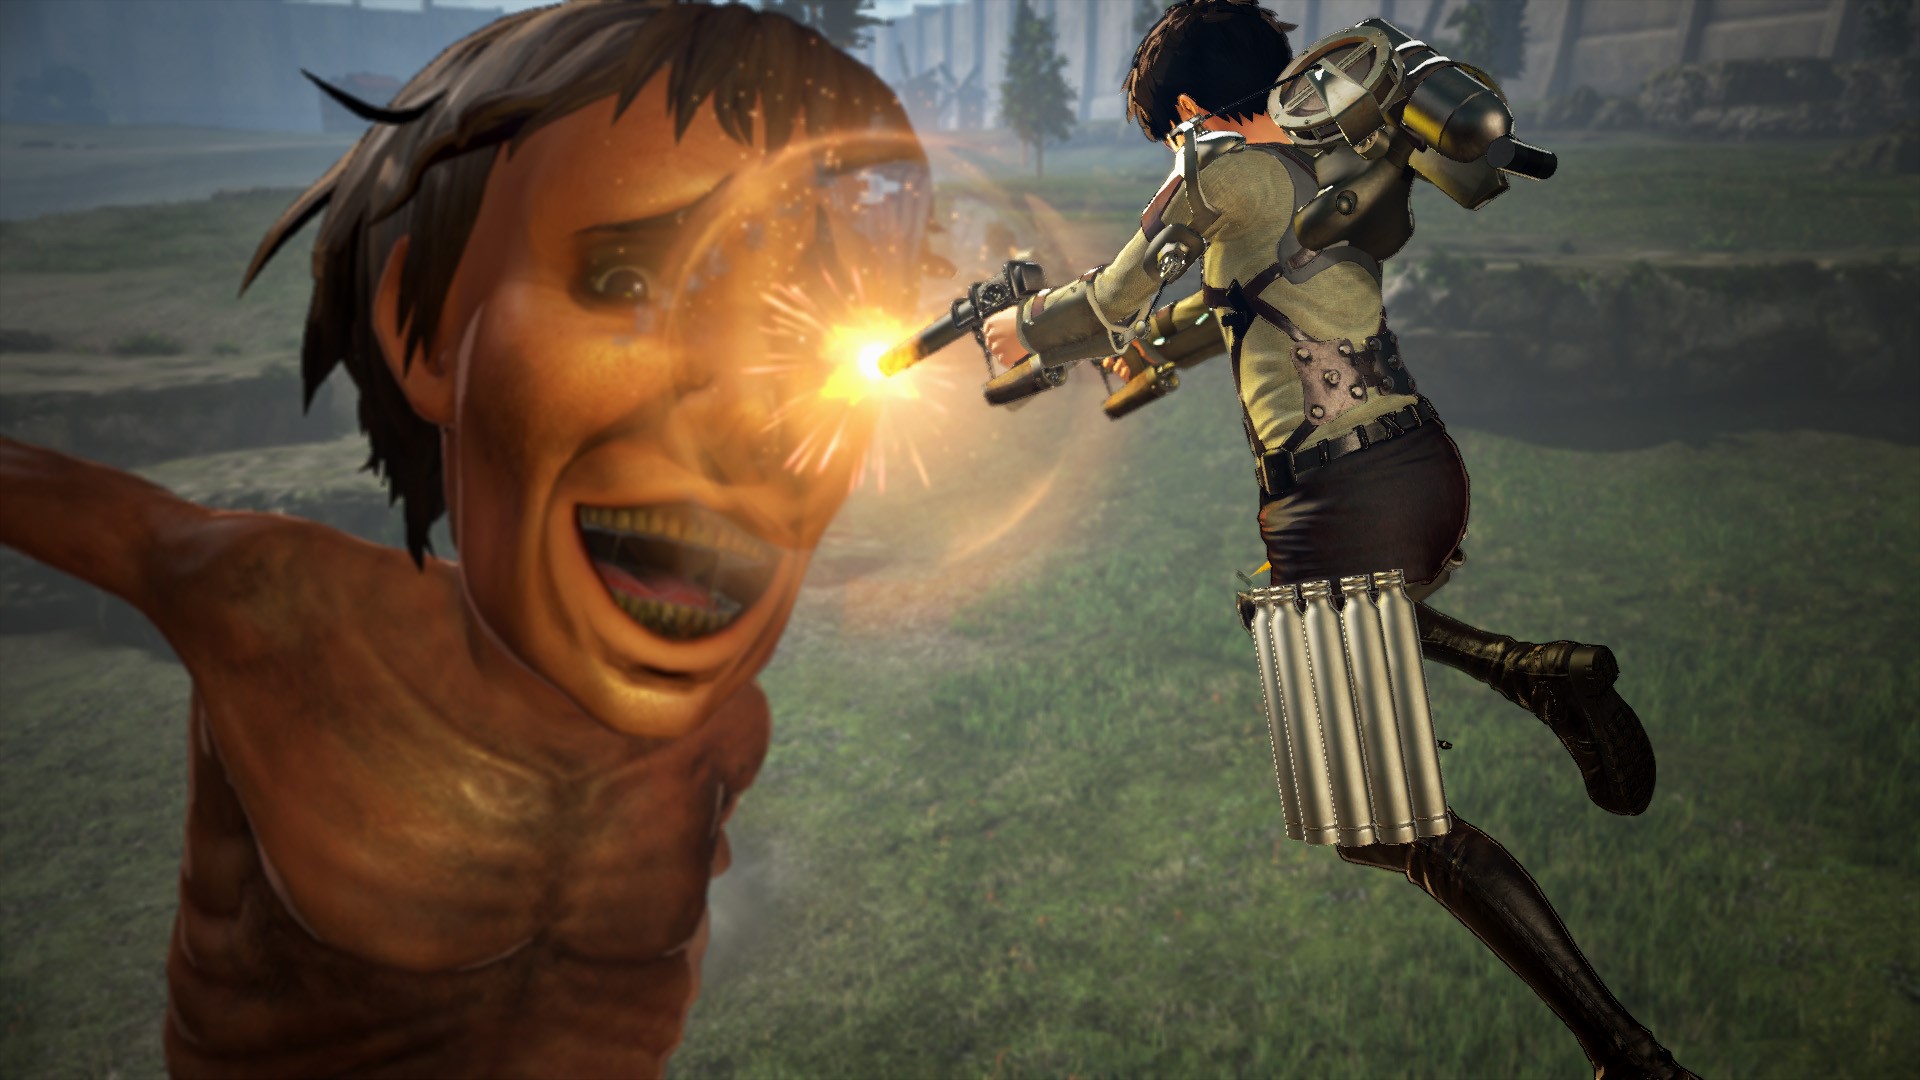 Traute Attack On Titan 2 Wallpapers